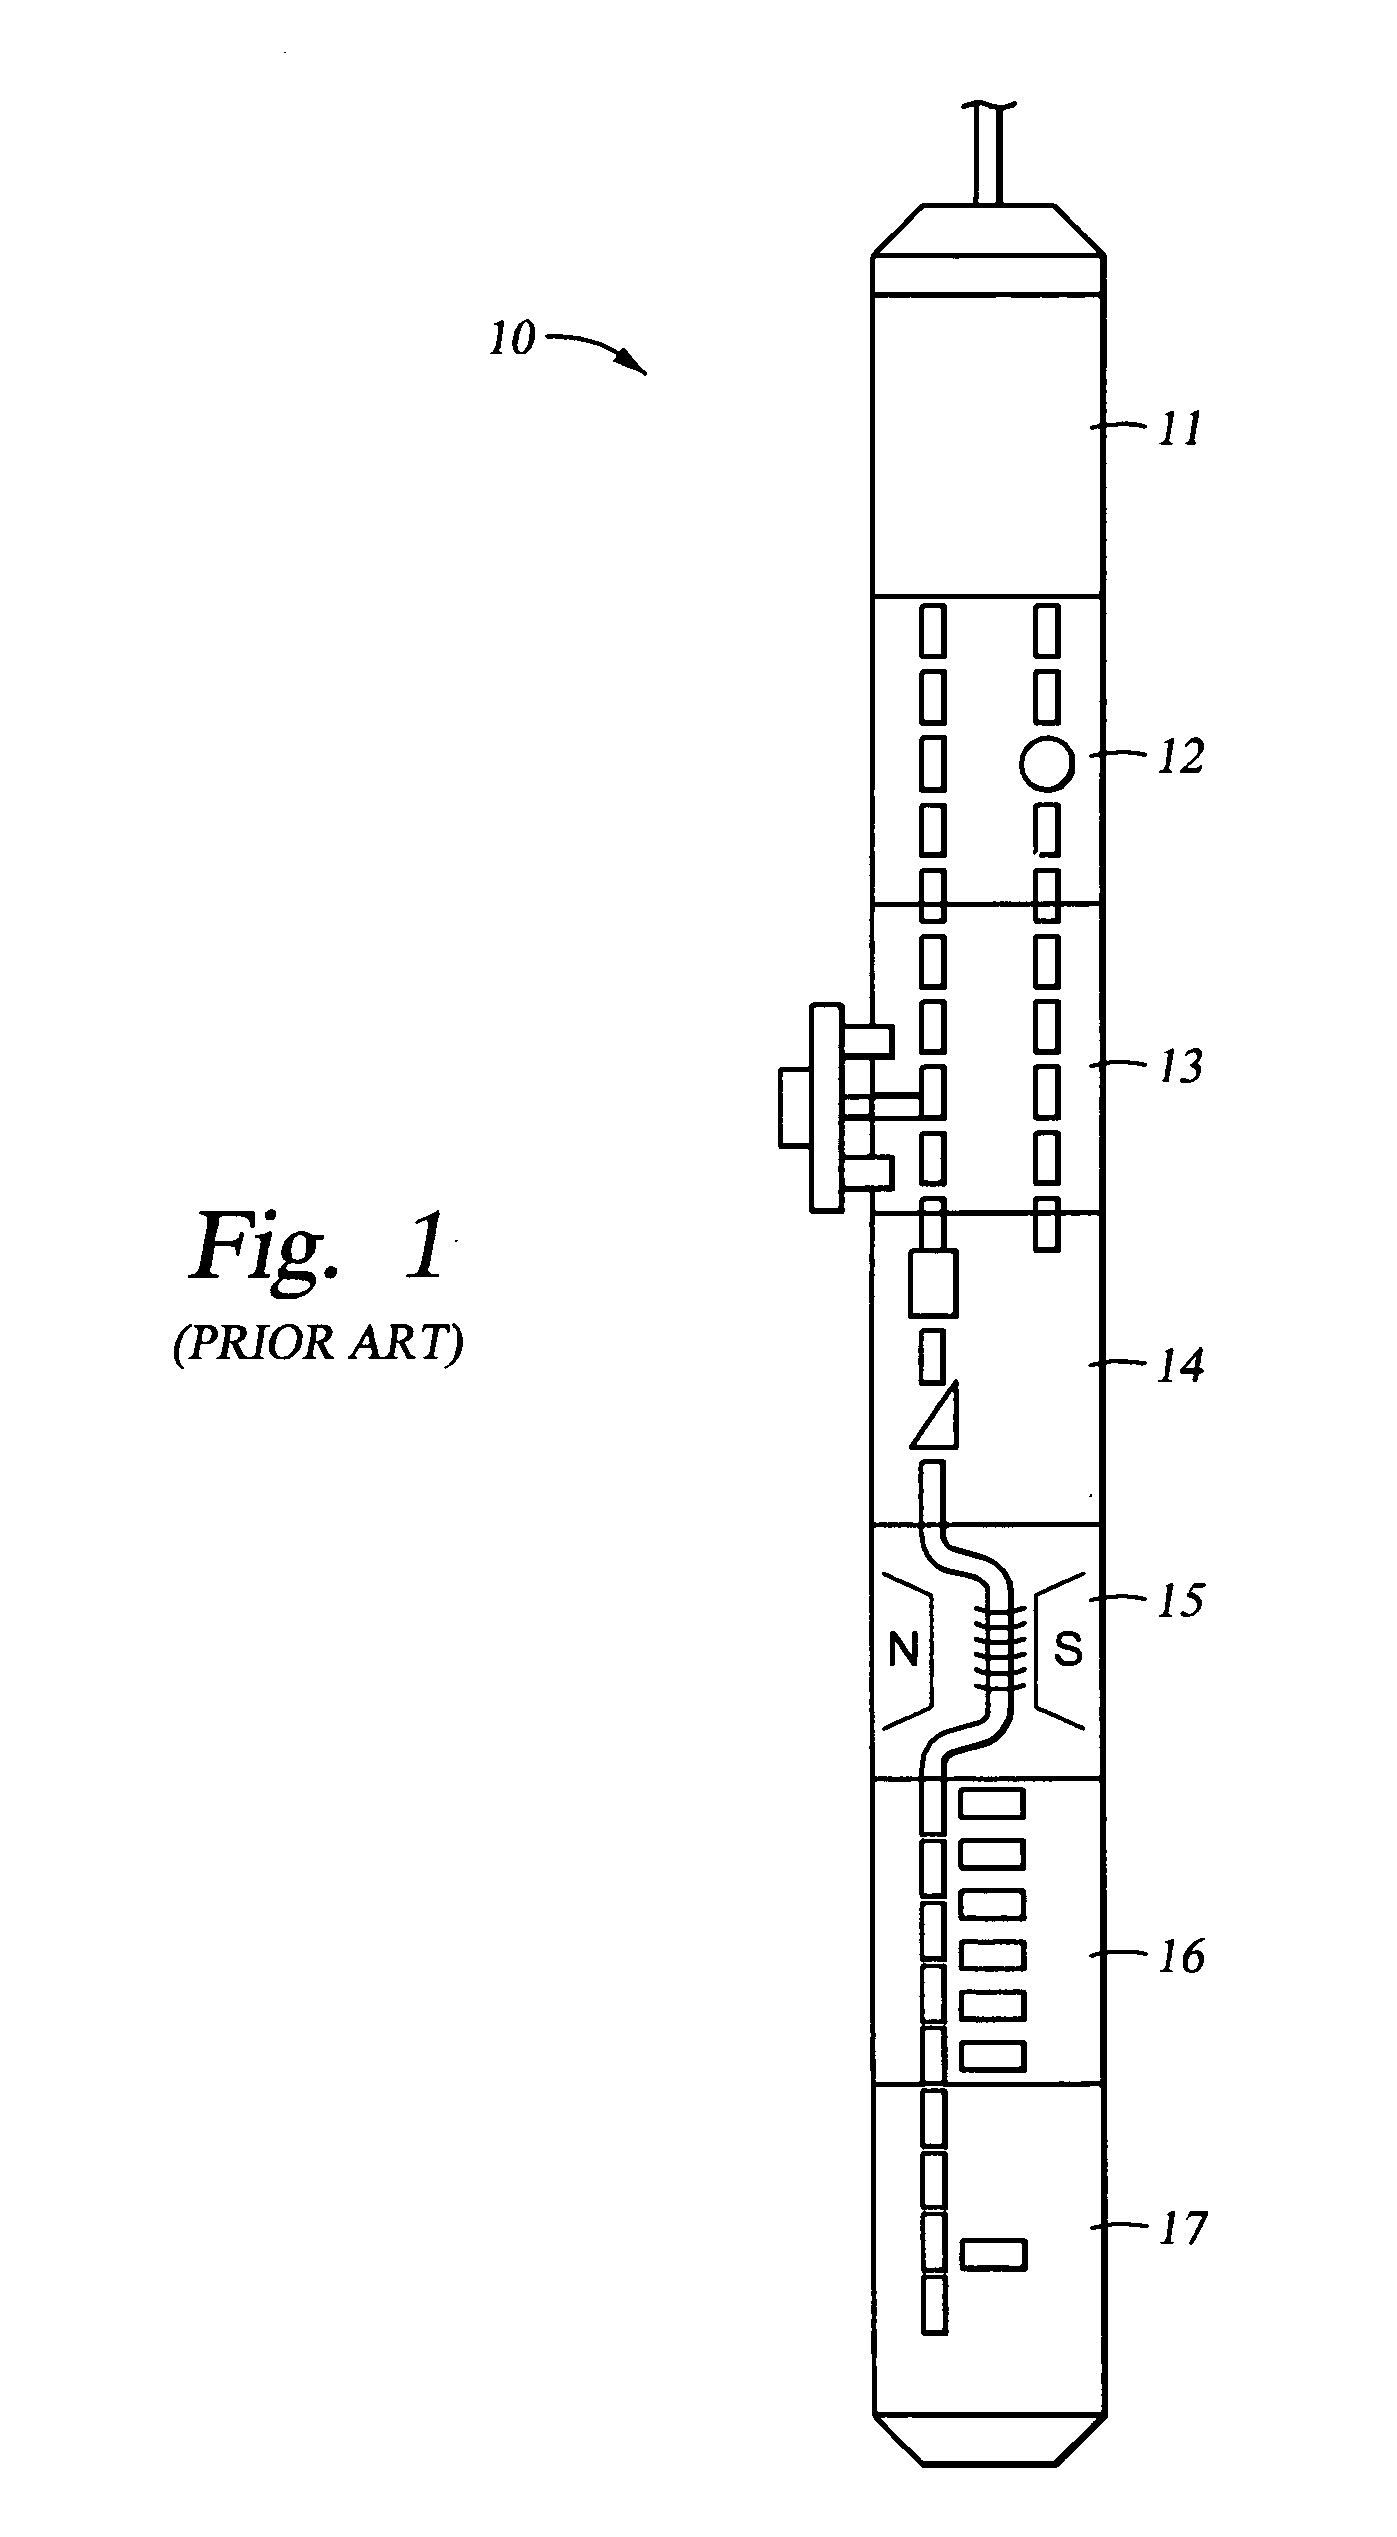 Method and apparatus for using pulsed field gradient NMR measurements to determine fluid properties in a fluid sampling well logging tool